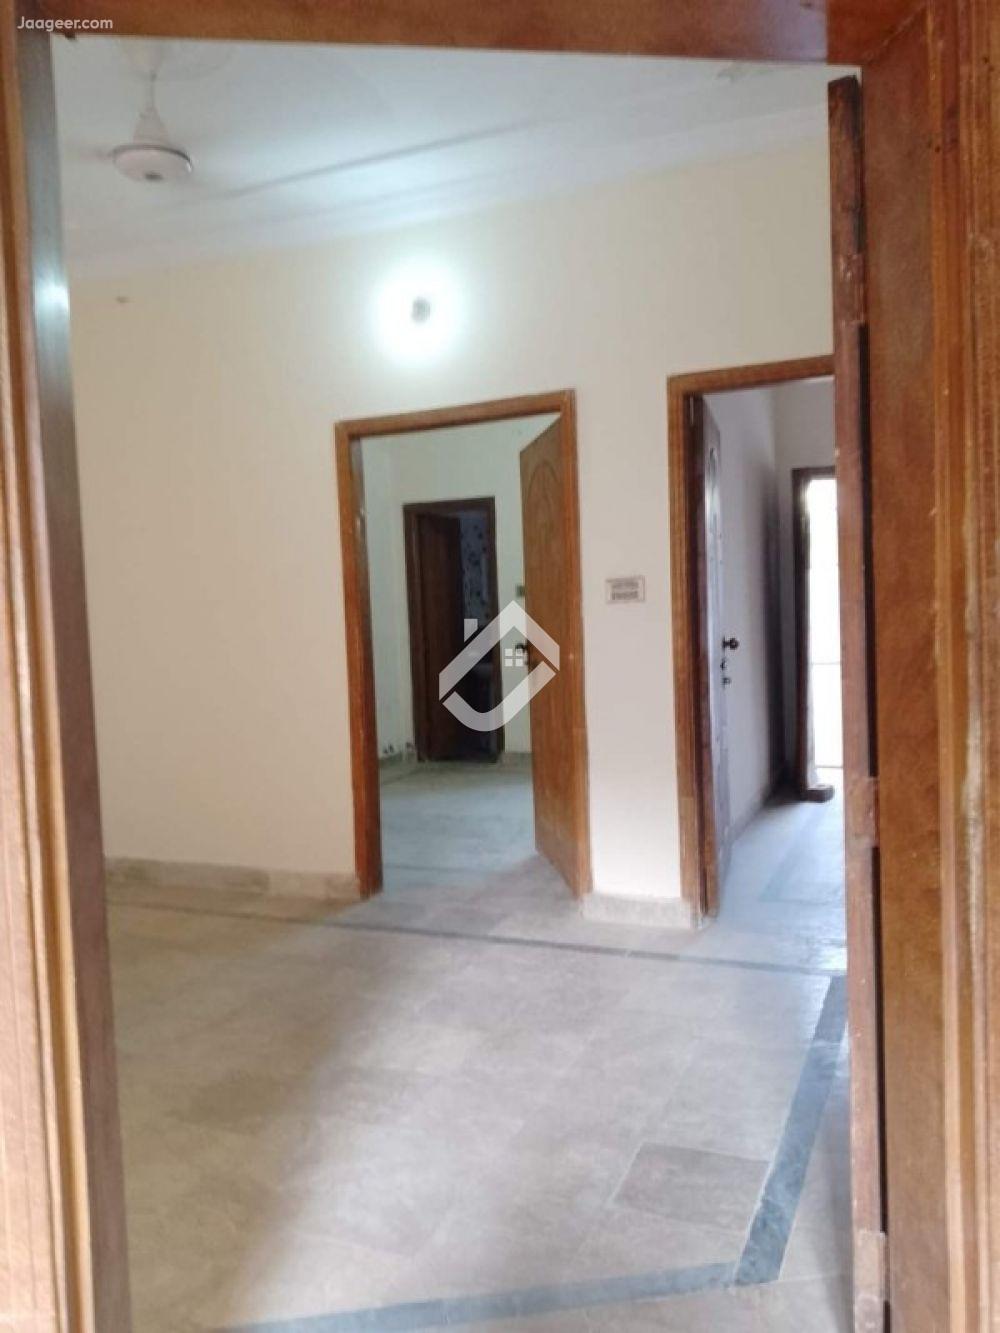 View  3 Marla House For Rent In Ghauri Town Phase-4a in Ghauri Town, Islamabad